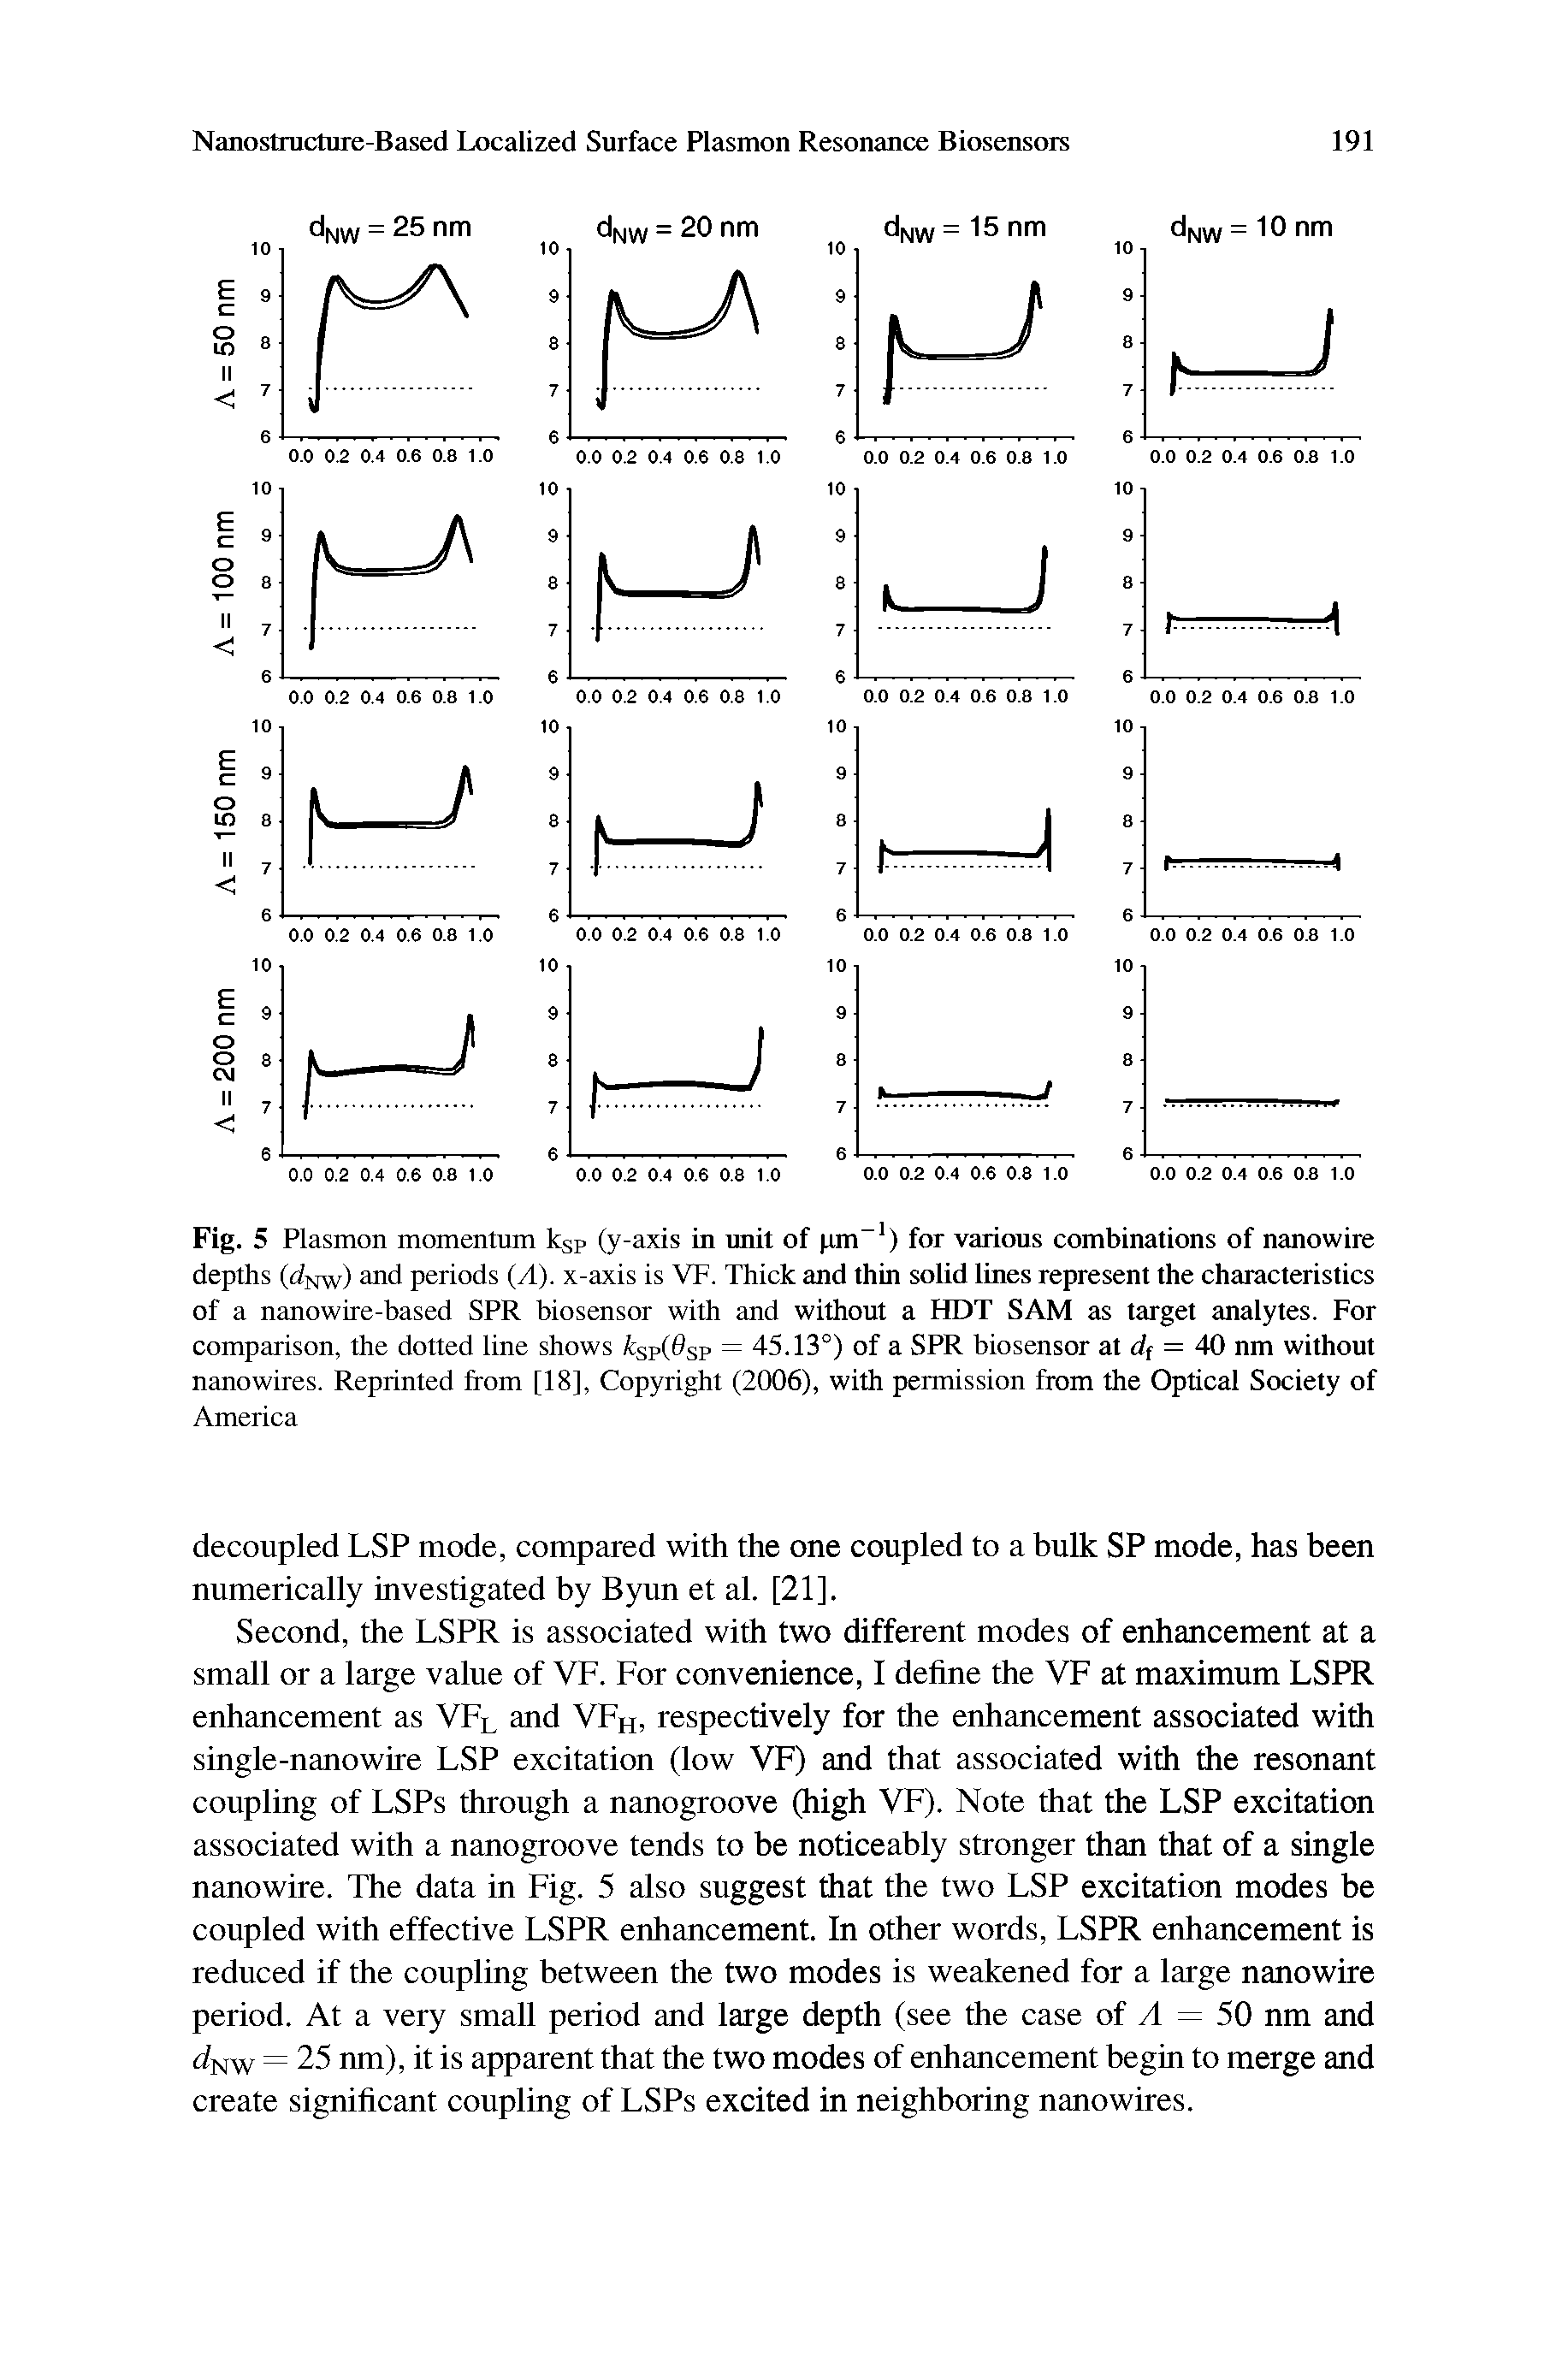 Fig. 5 Plasmon momentum ksp (y-axis in unit of tm ) for various combinations of nanowire depths (dNw) and periods (A), x-axis is VF. Thick and thin solid lines represent the characteristics of a nanowire-hased SPR biosensor with and without a HDT SAM as target analytes. For comparison, the dotted line shows sp( sp = 45.13°) of a SPR biosensor at df = 40 nm without nanowires. Reprinted from [18], Copyright (2006), with permission from the Optical Society of America...